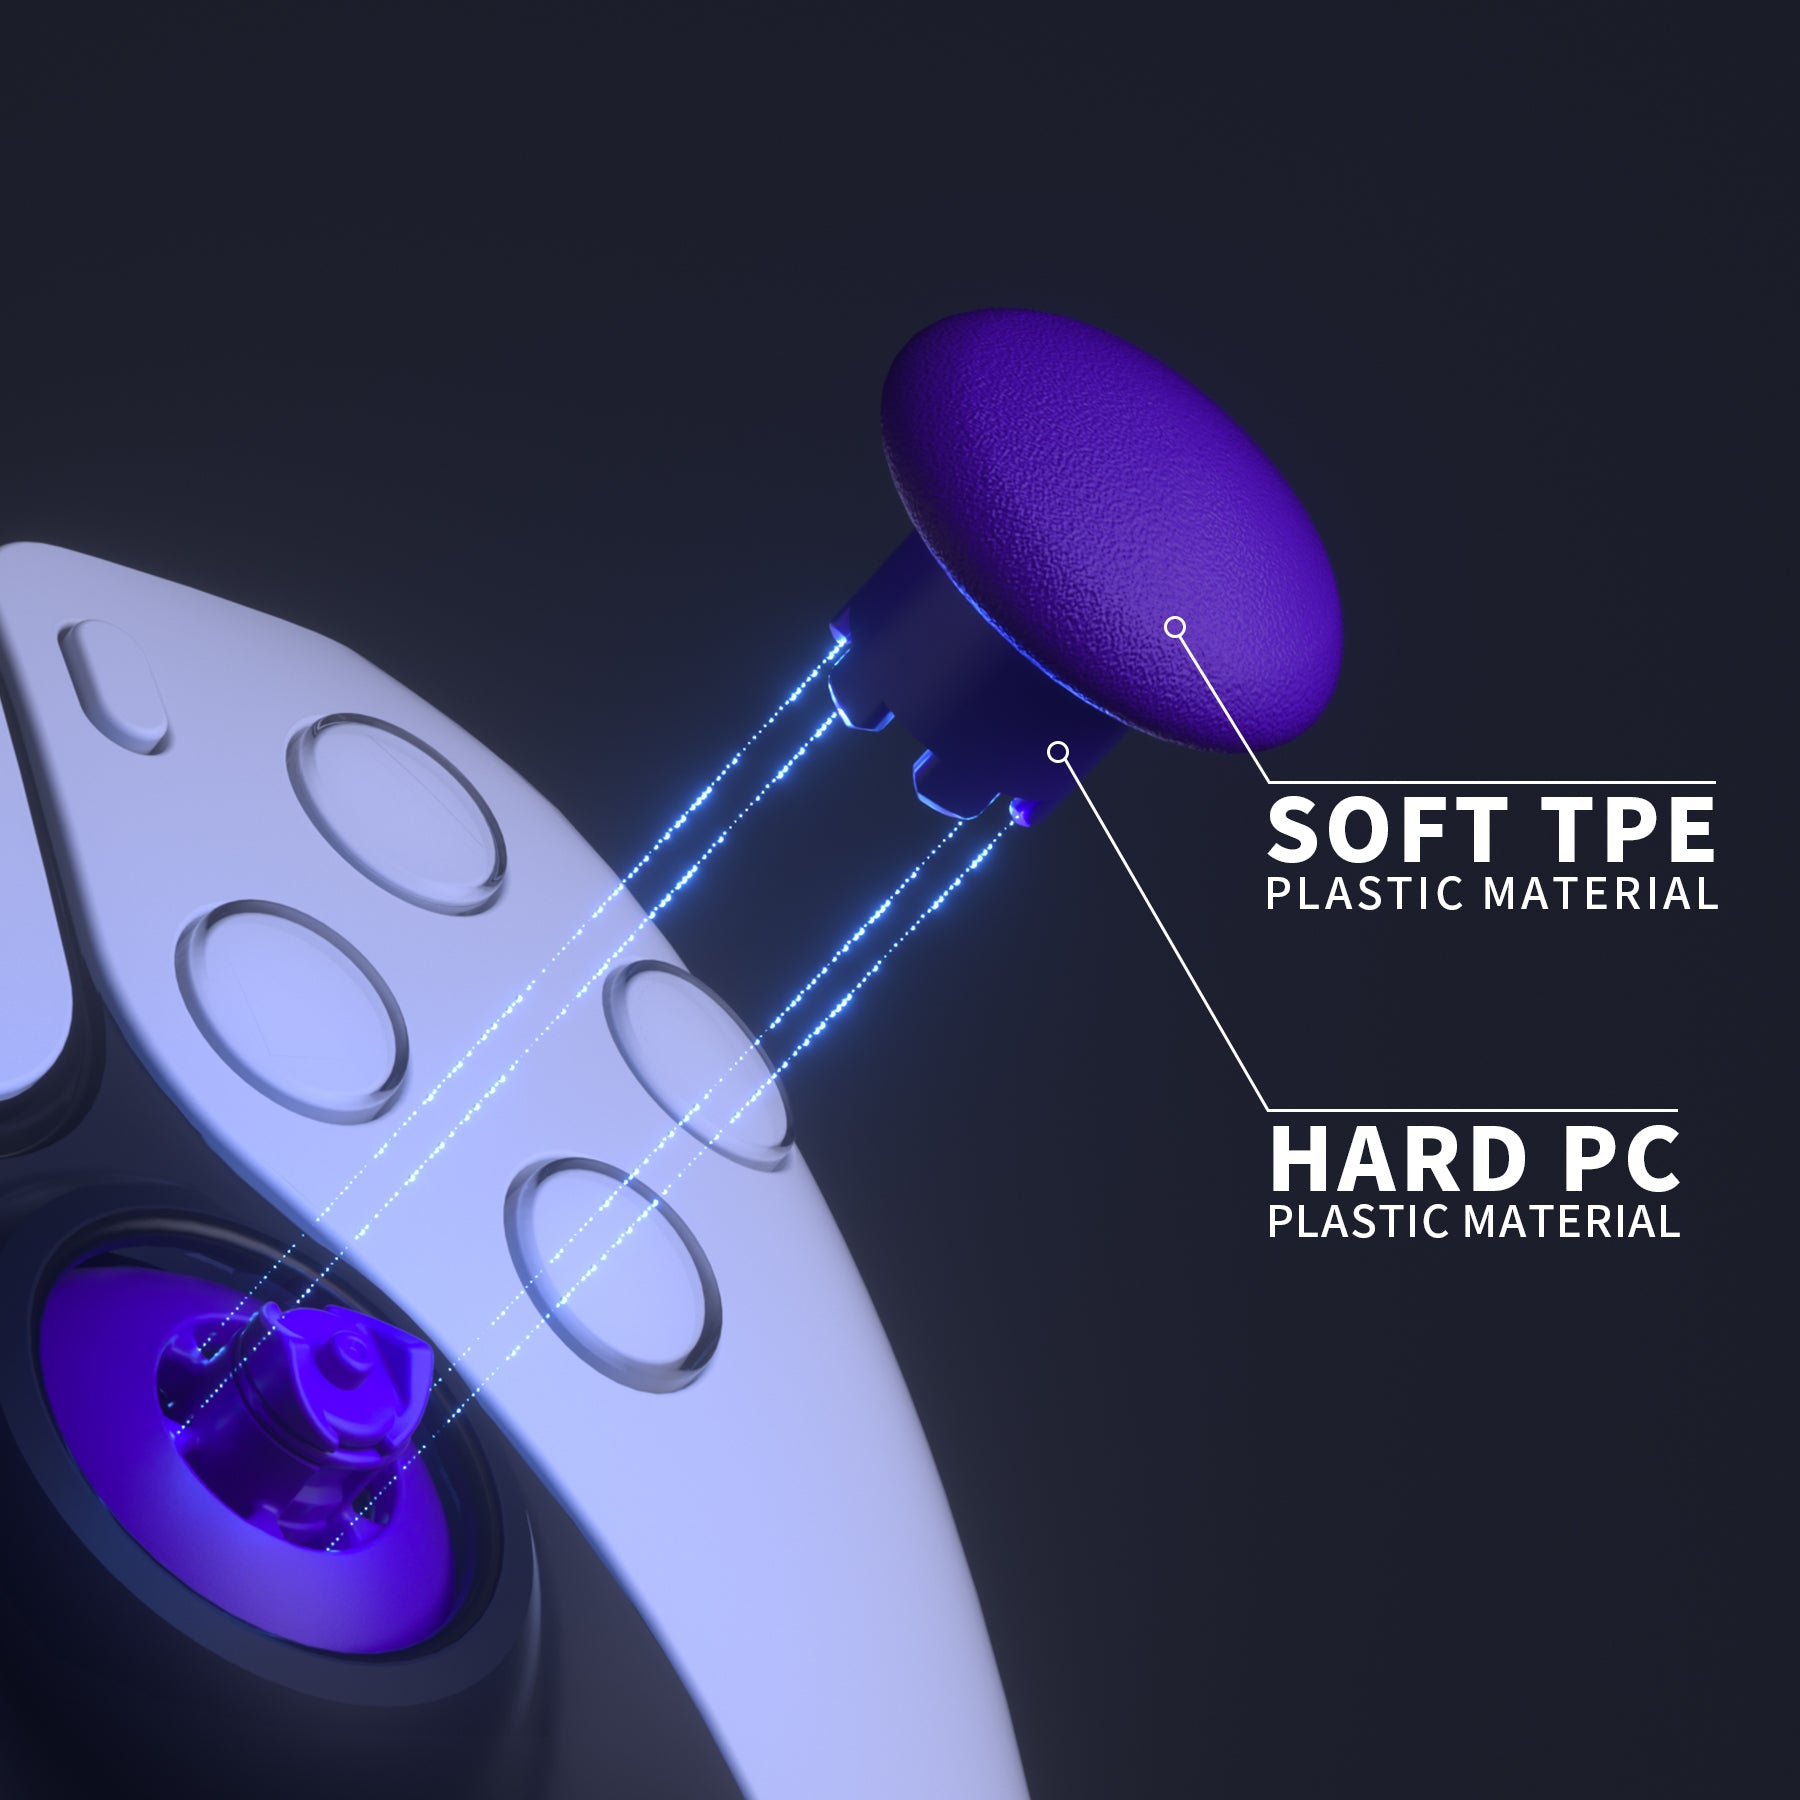 EDGE Sticks Replacement Interchangeable Thumbsticks for PS5 & PS4 All Model Controllers - Purple eXtremeRate